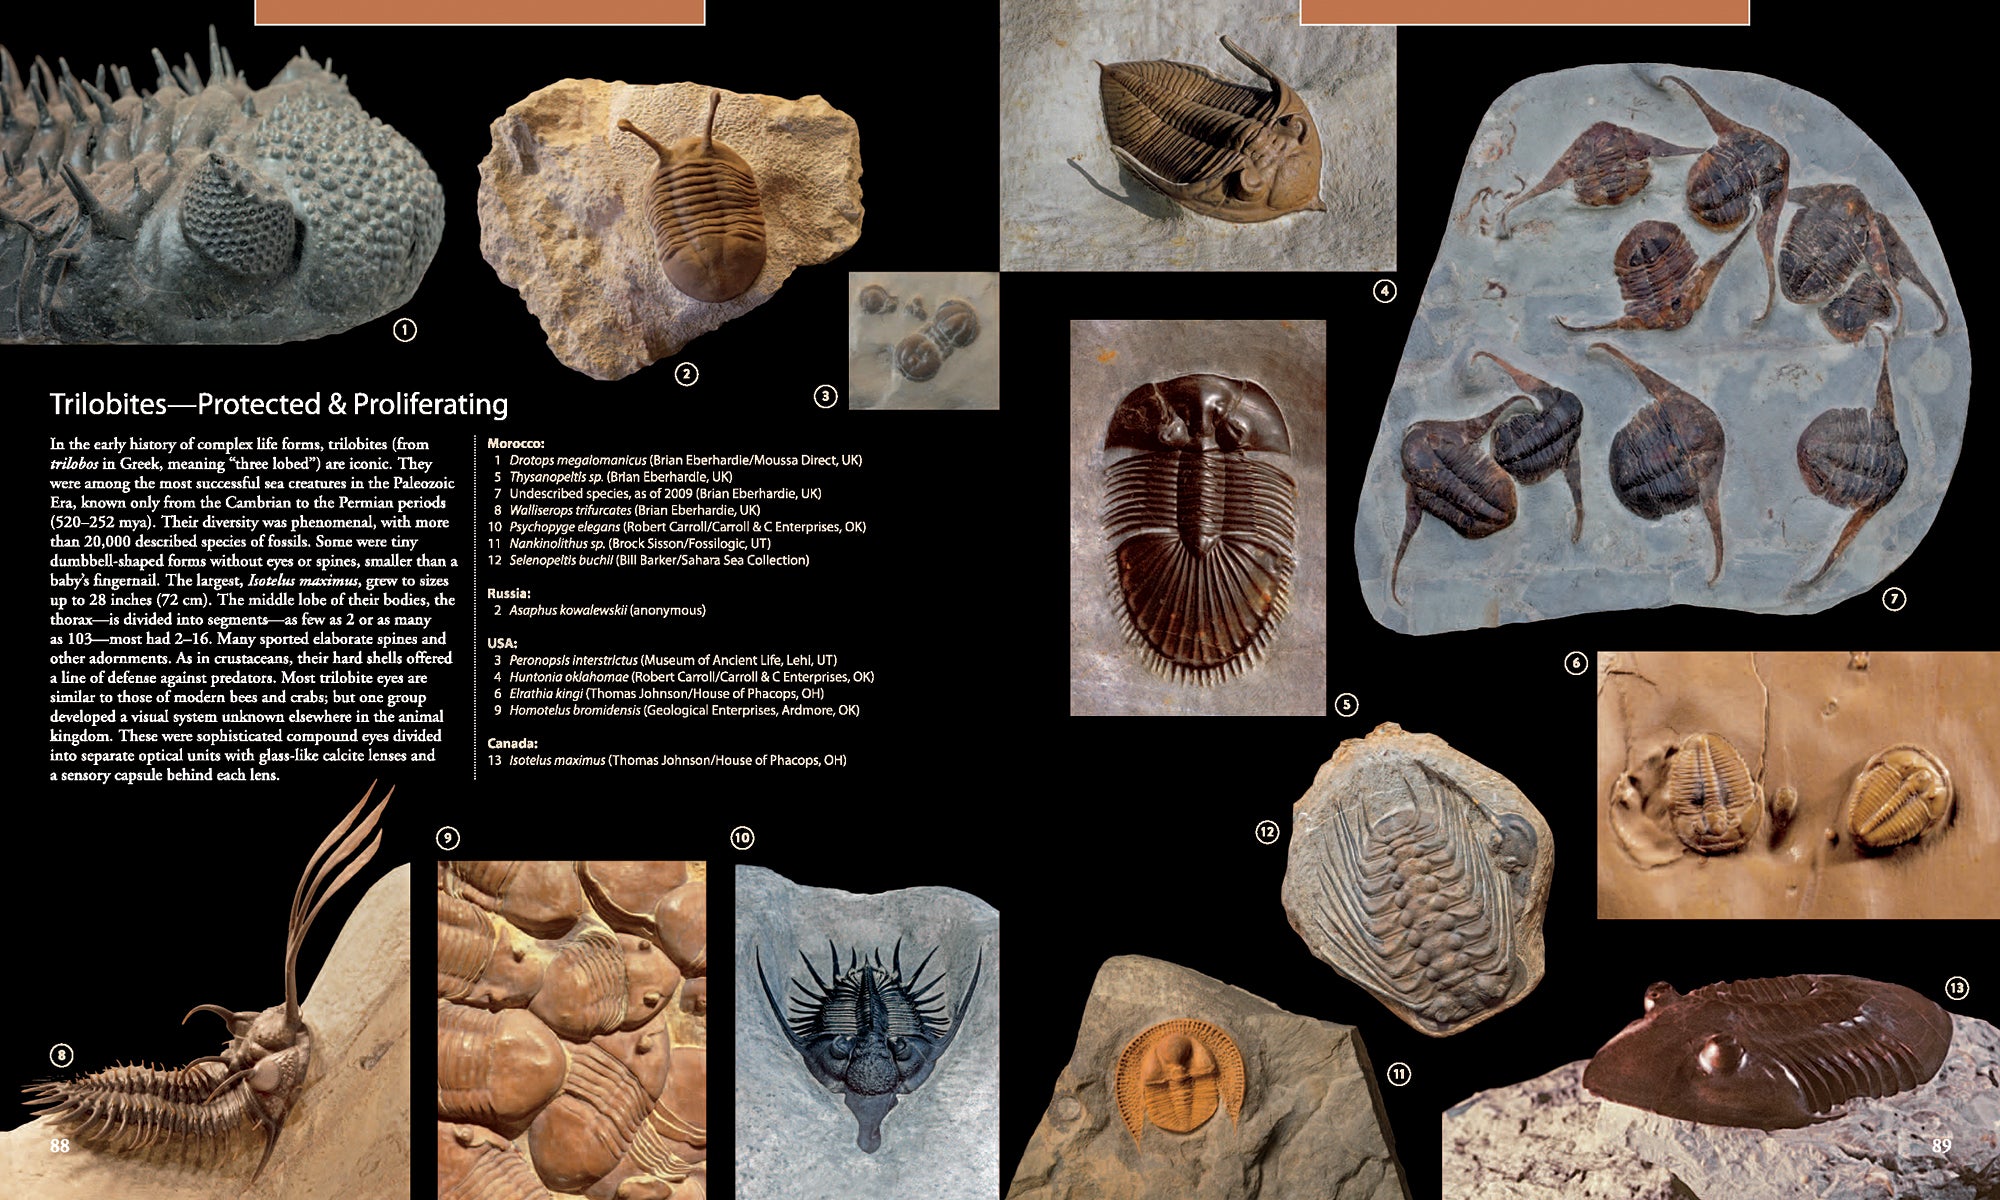 FIREFLY'S FOSSILS INSIDE OUT: A GLOBAL FUSION OF SCIENCE, ART AND CULTURE